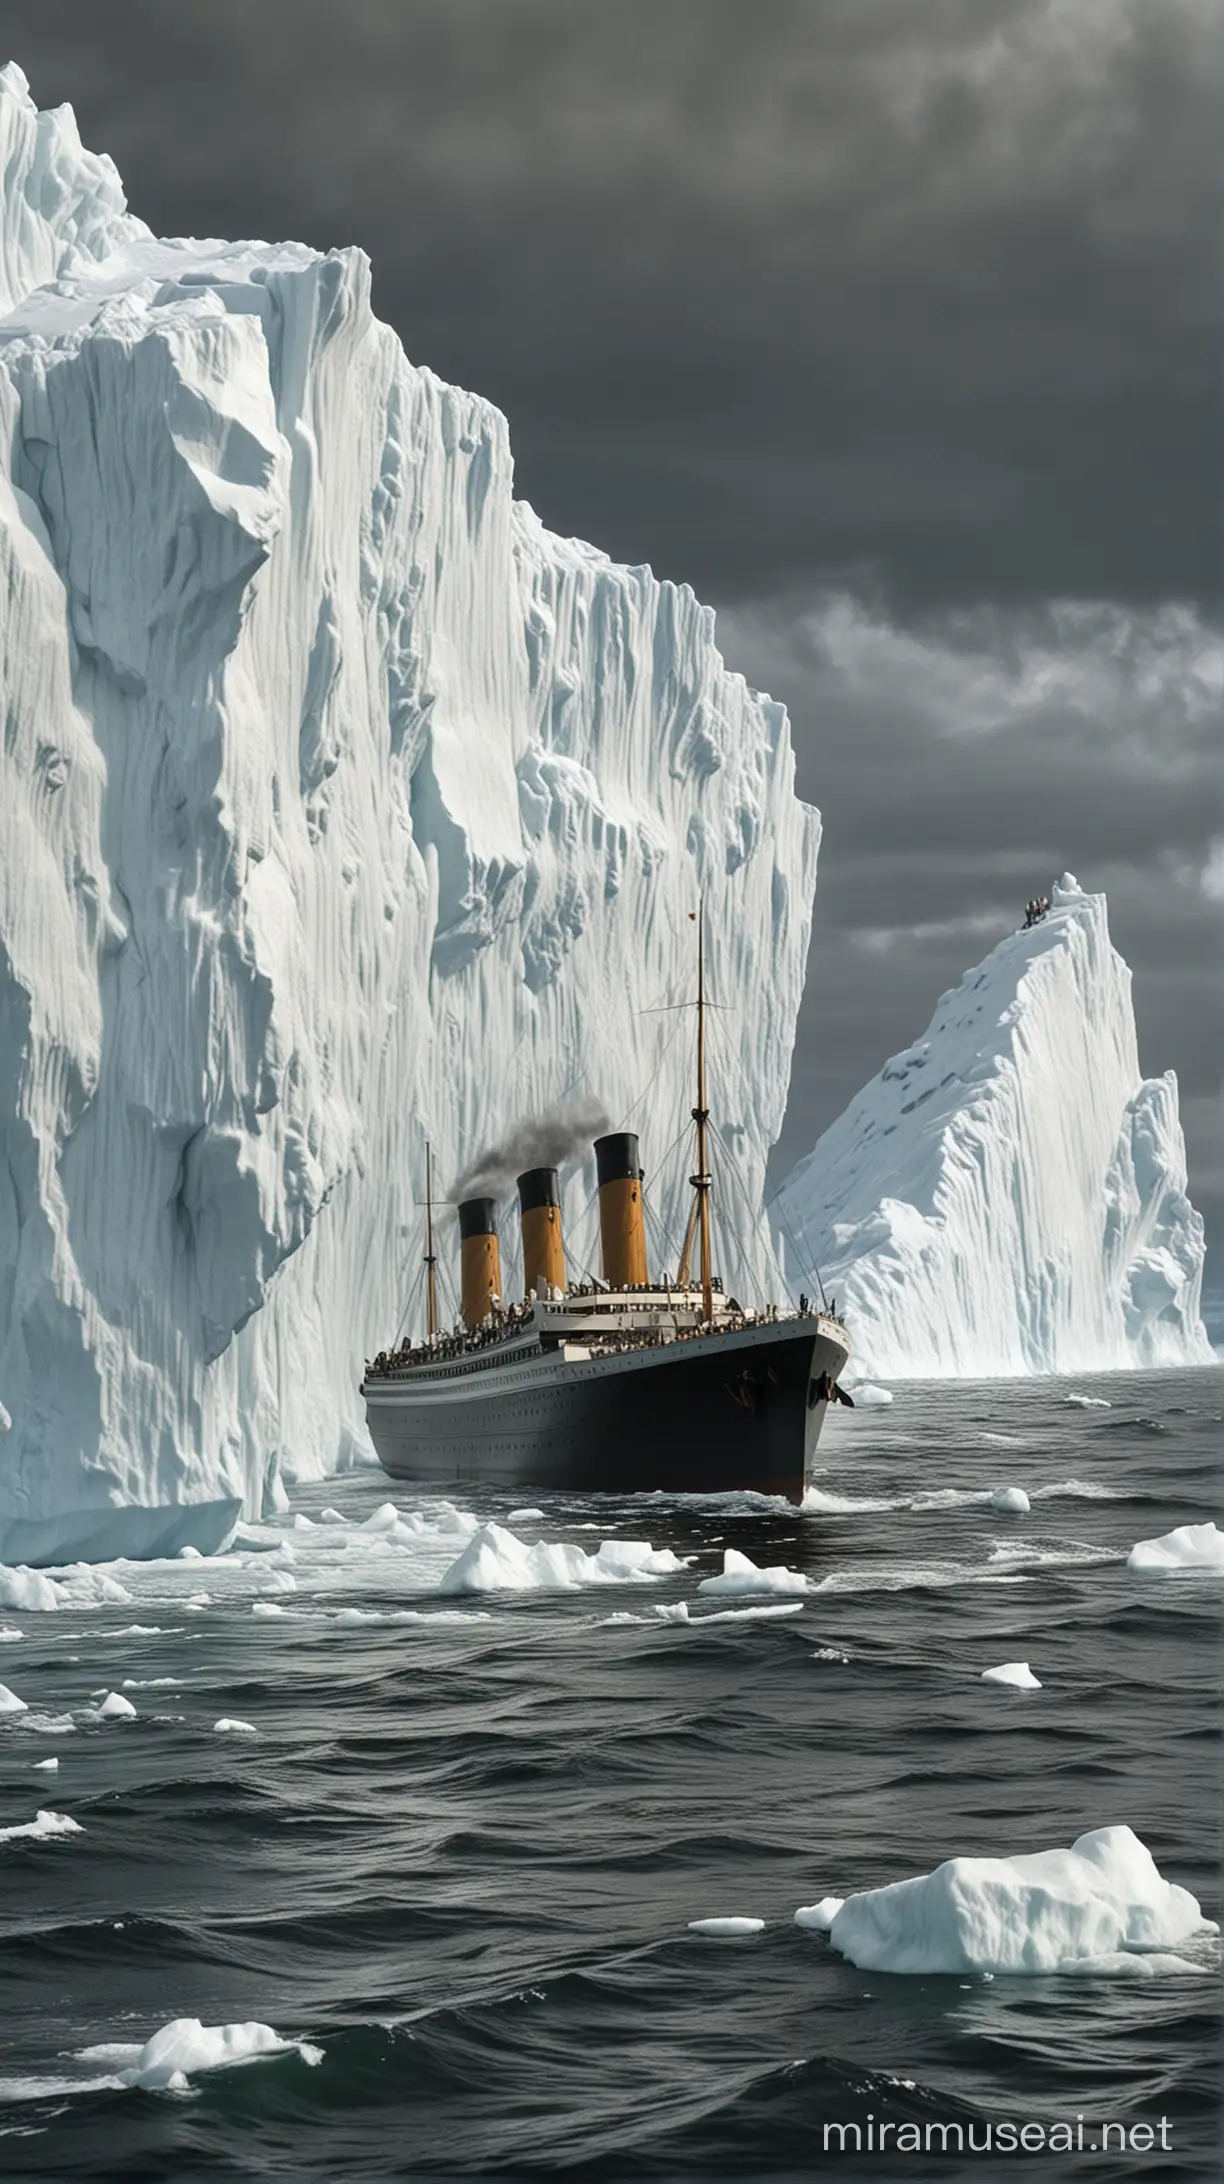 The Titanic hits an iceberg about an hour later while the SS Californian remains nearby.